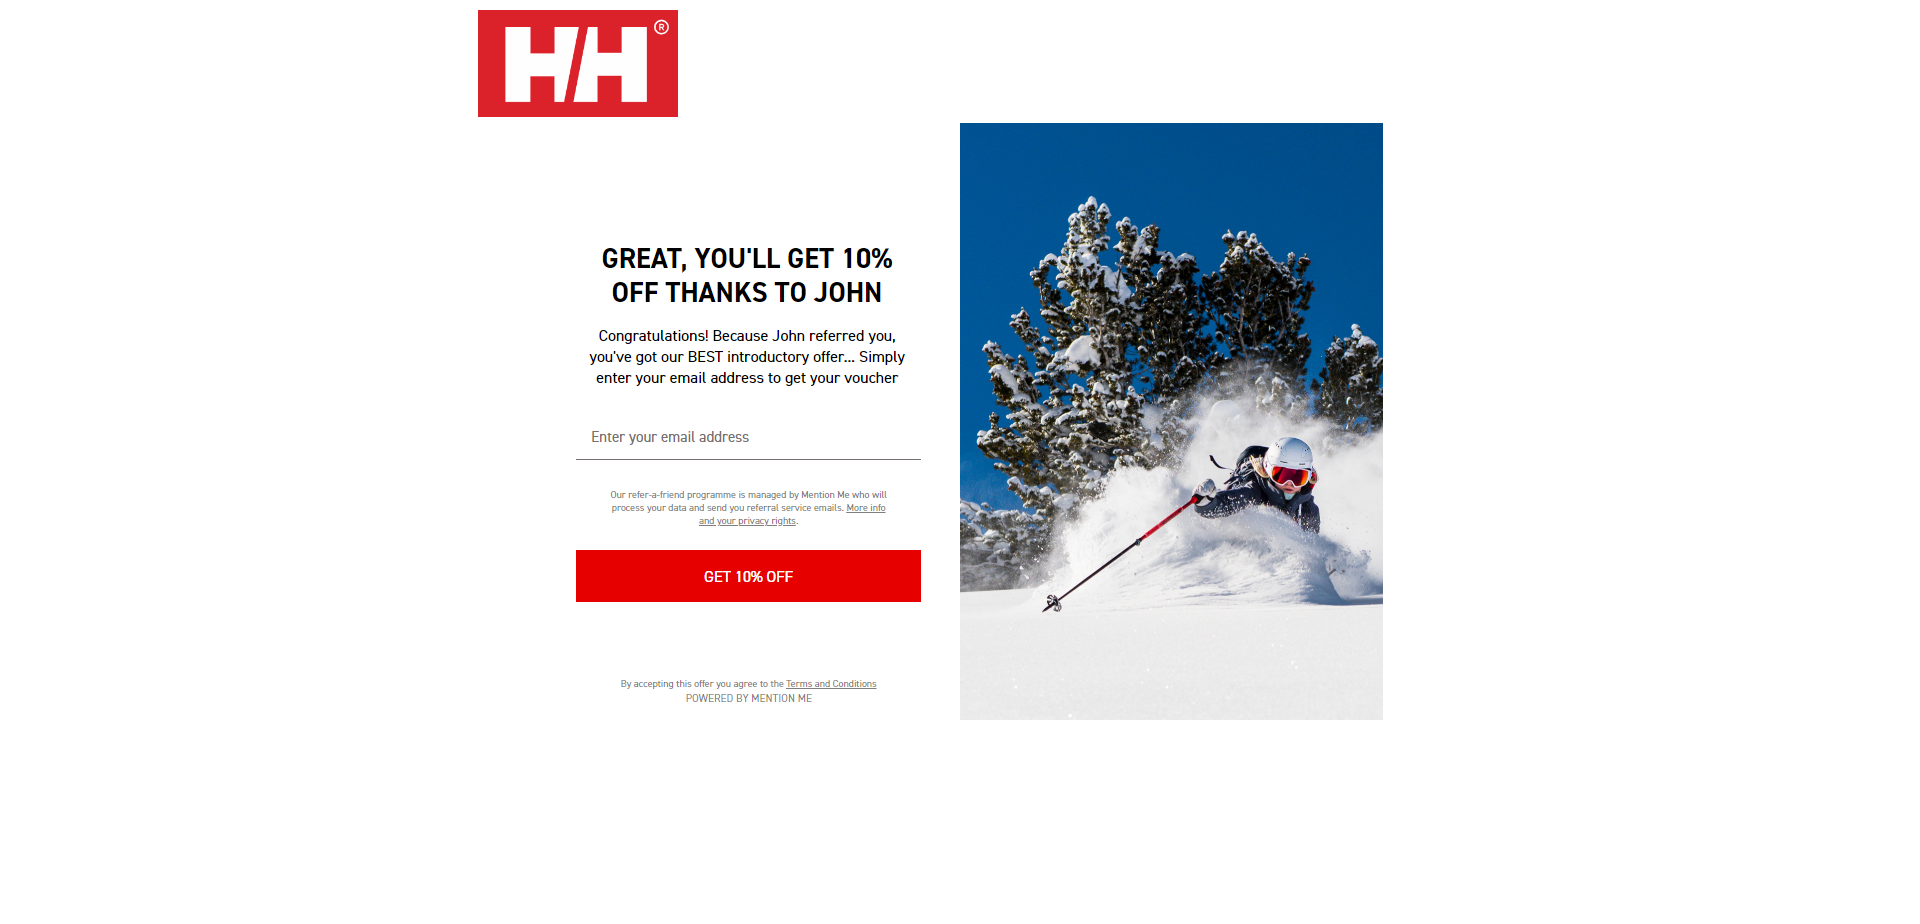 Referral Landing Page for Helly Hansen